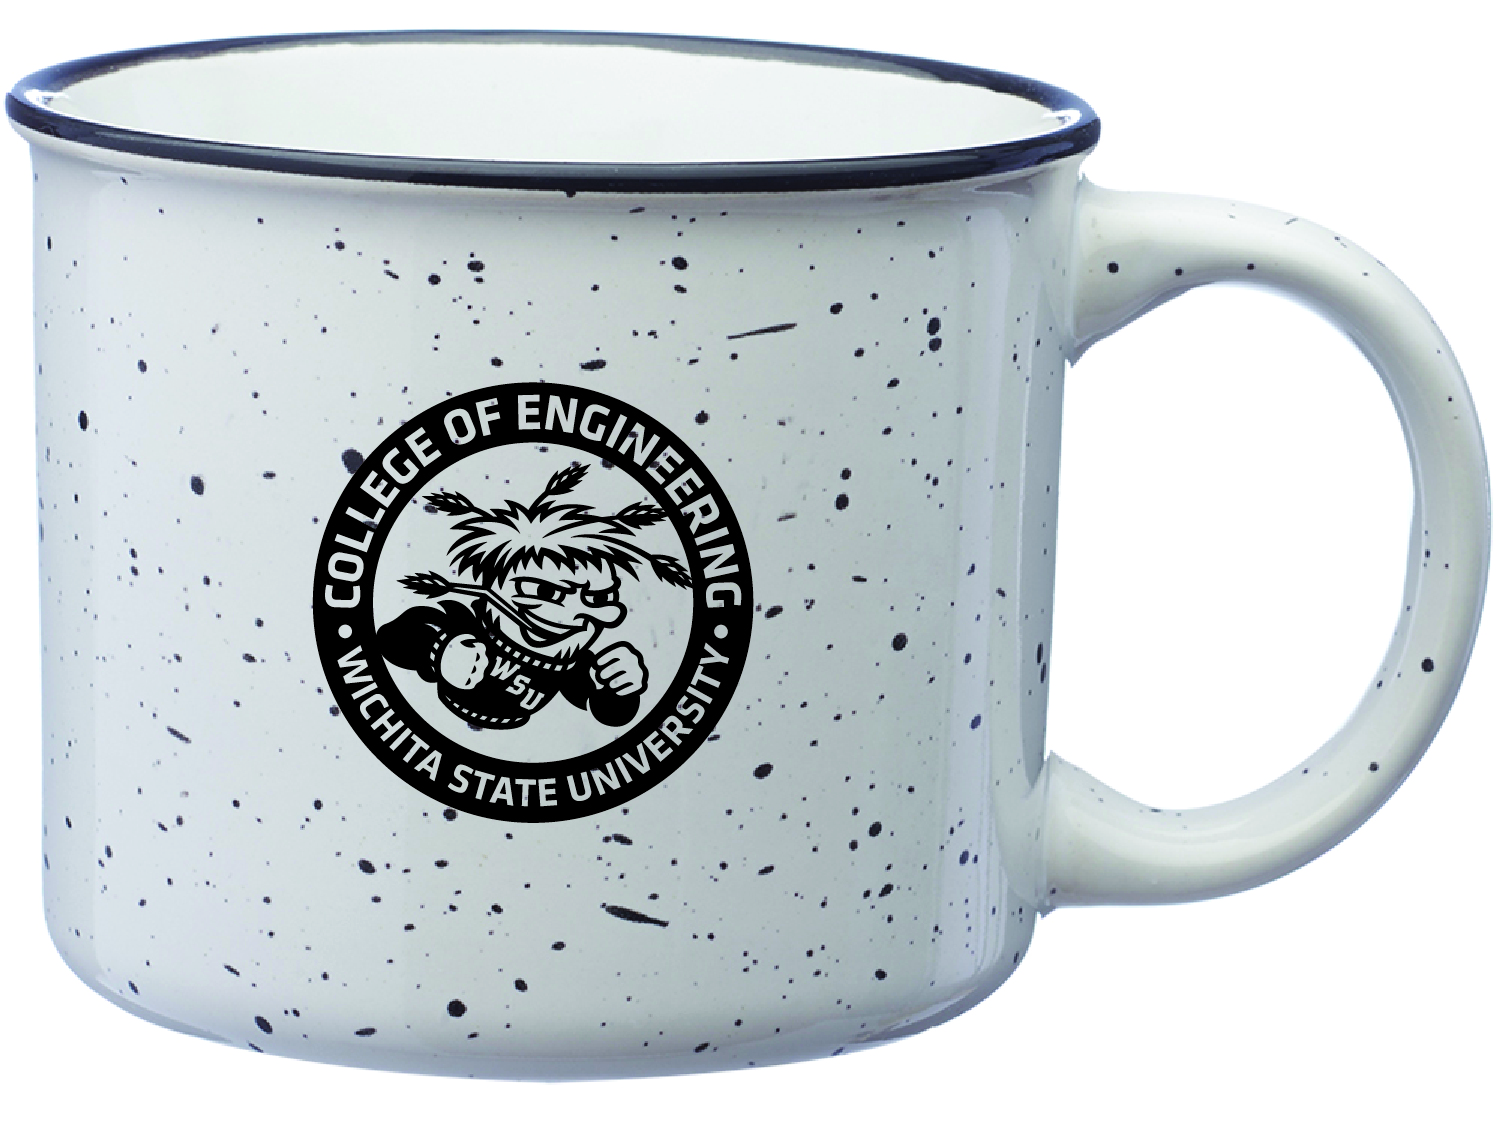 white mug with black speckles and imprinted with Wu Shock and College of Engineering Wichita State University